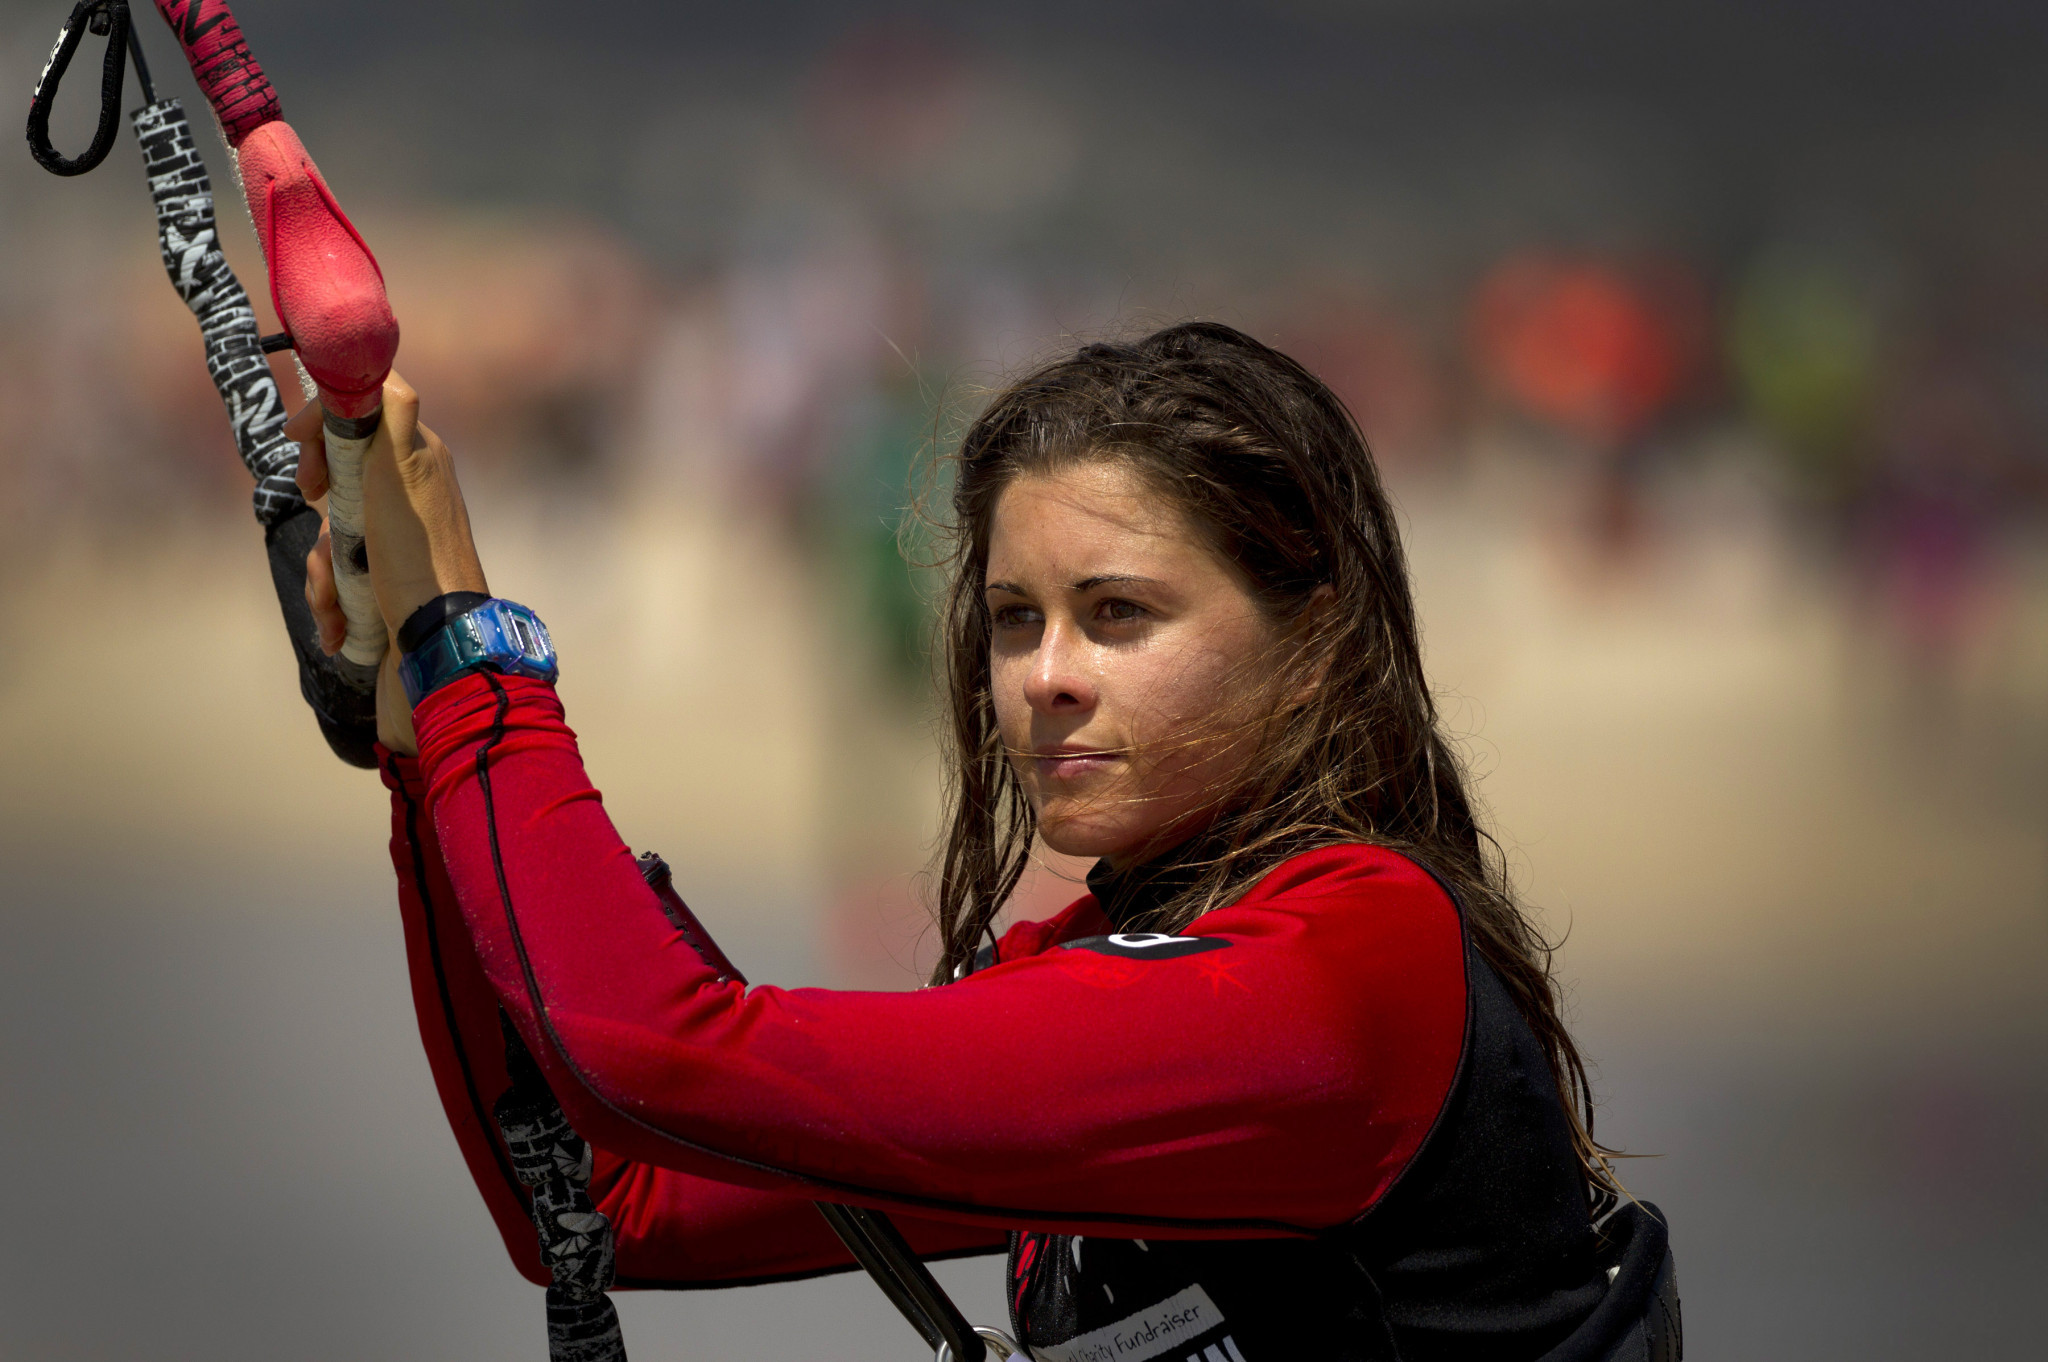 Pulido adapts training to focus on speed prior to kiteboarding debut at Paris 2024